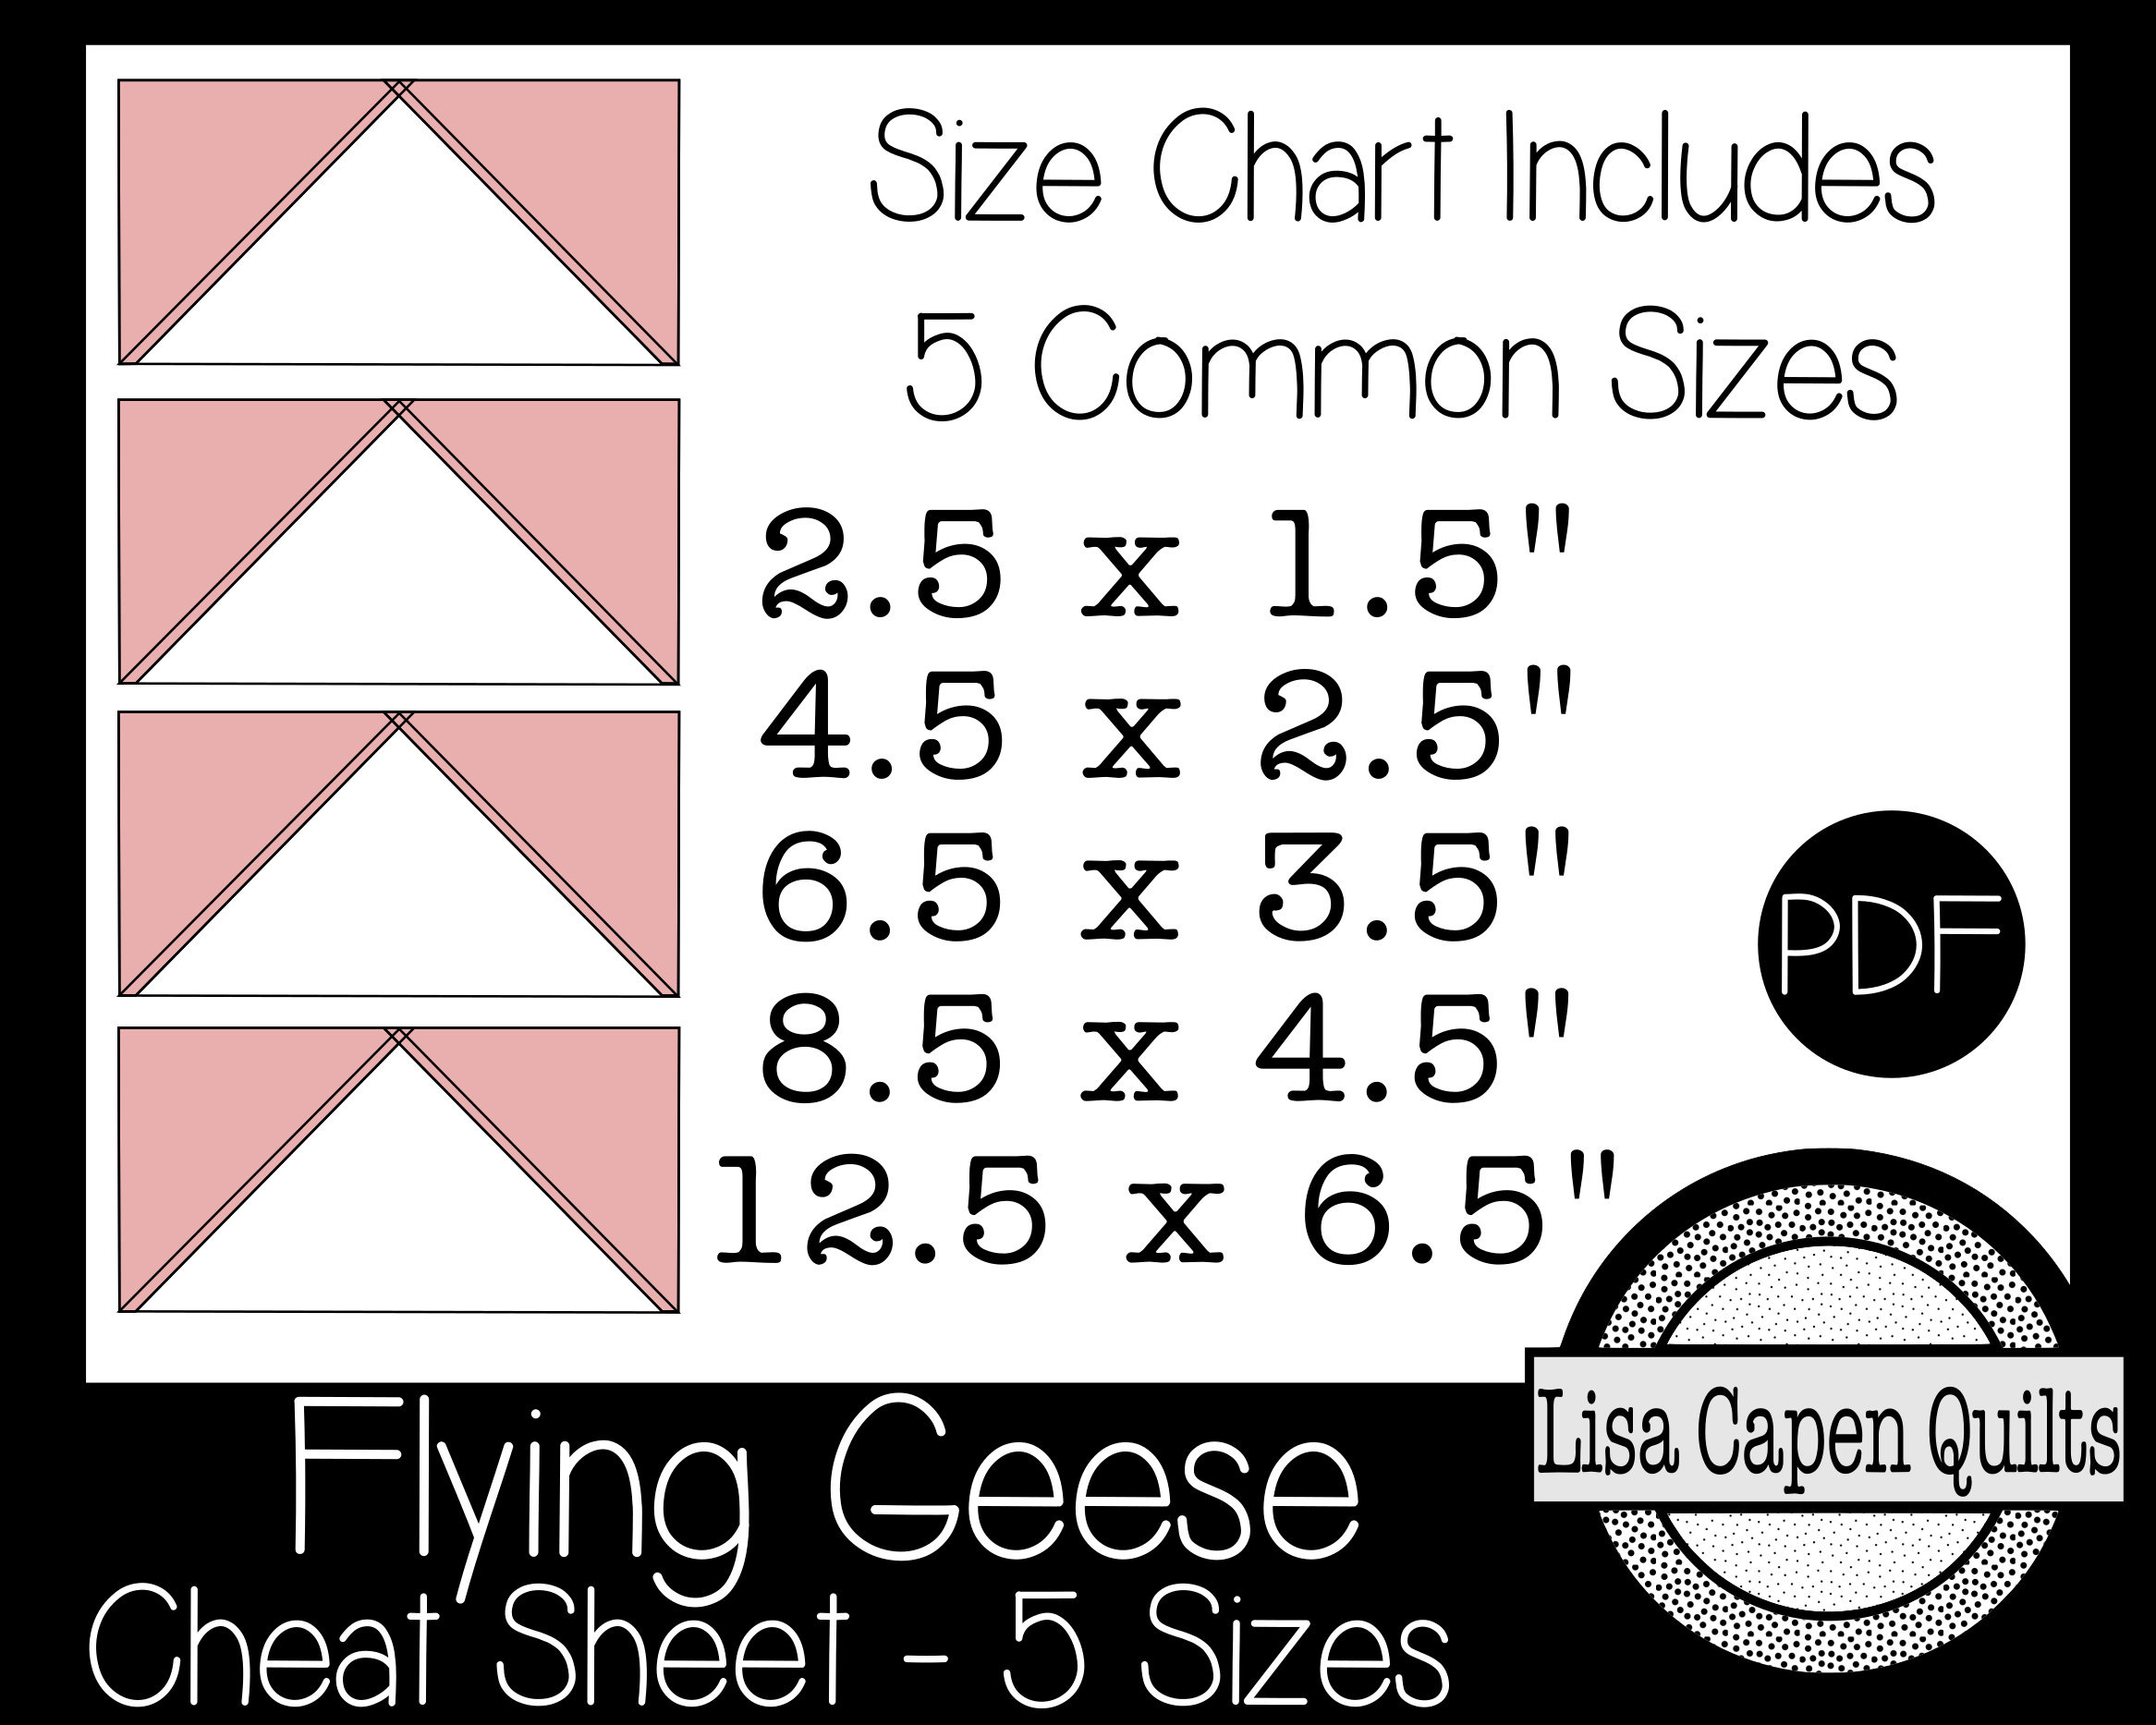 flying-geese-cheat-sheet-for-quilters-2-different-methods-etsy